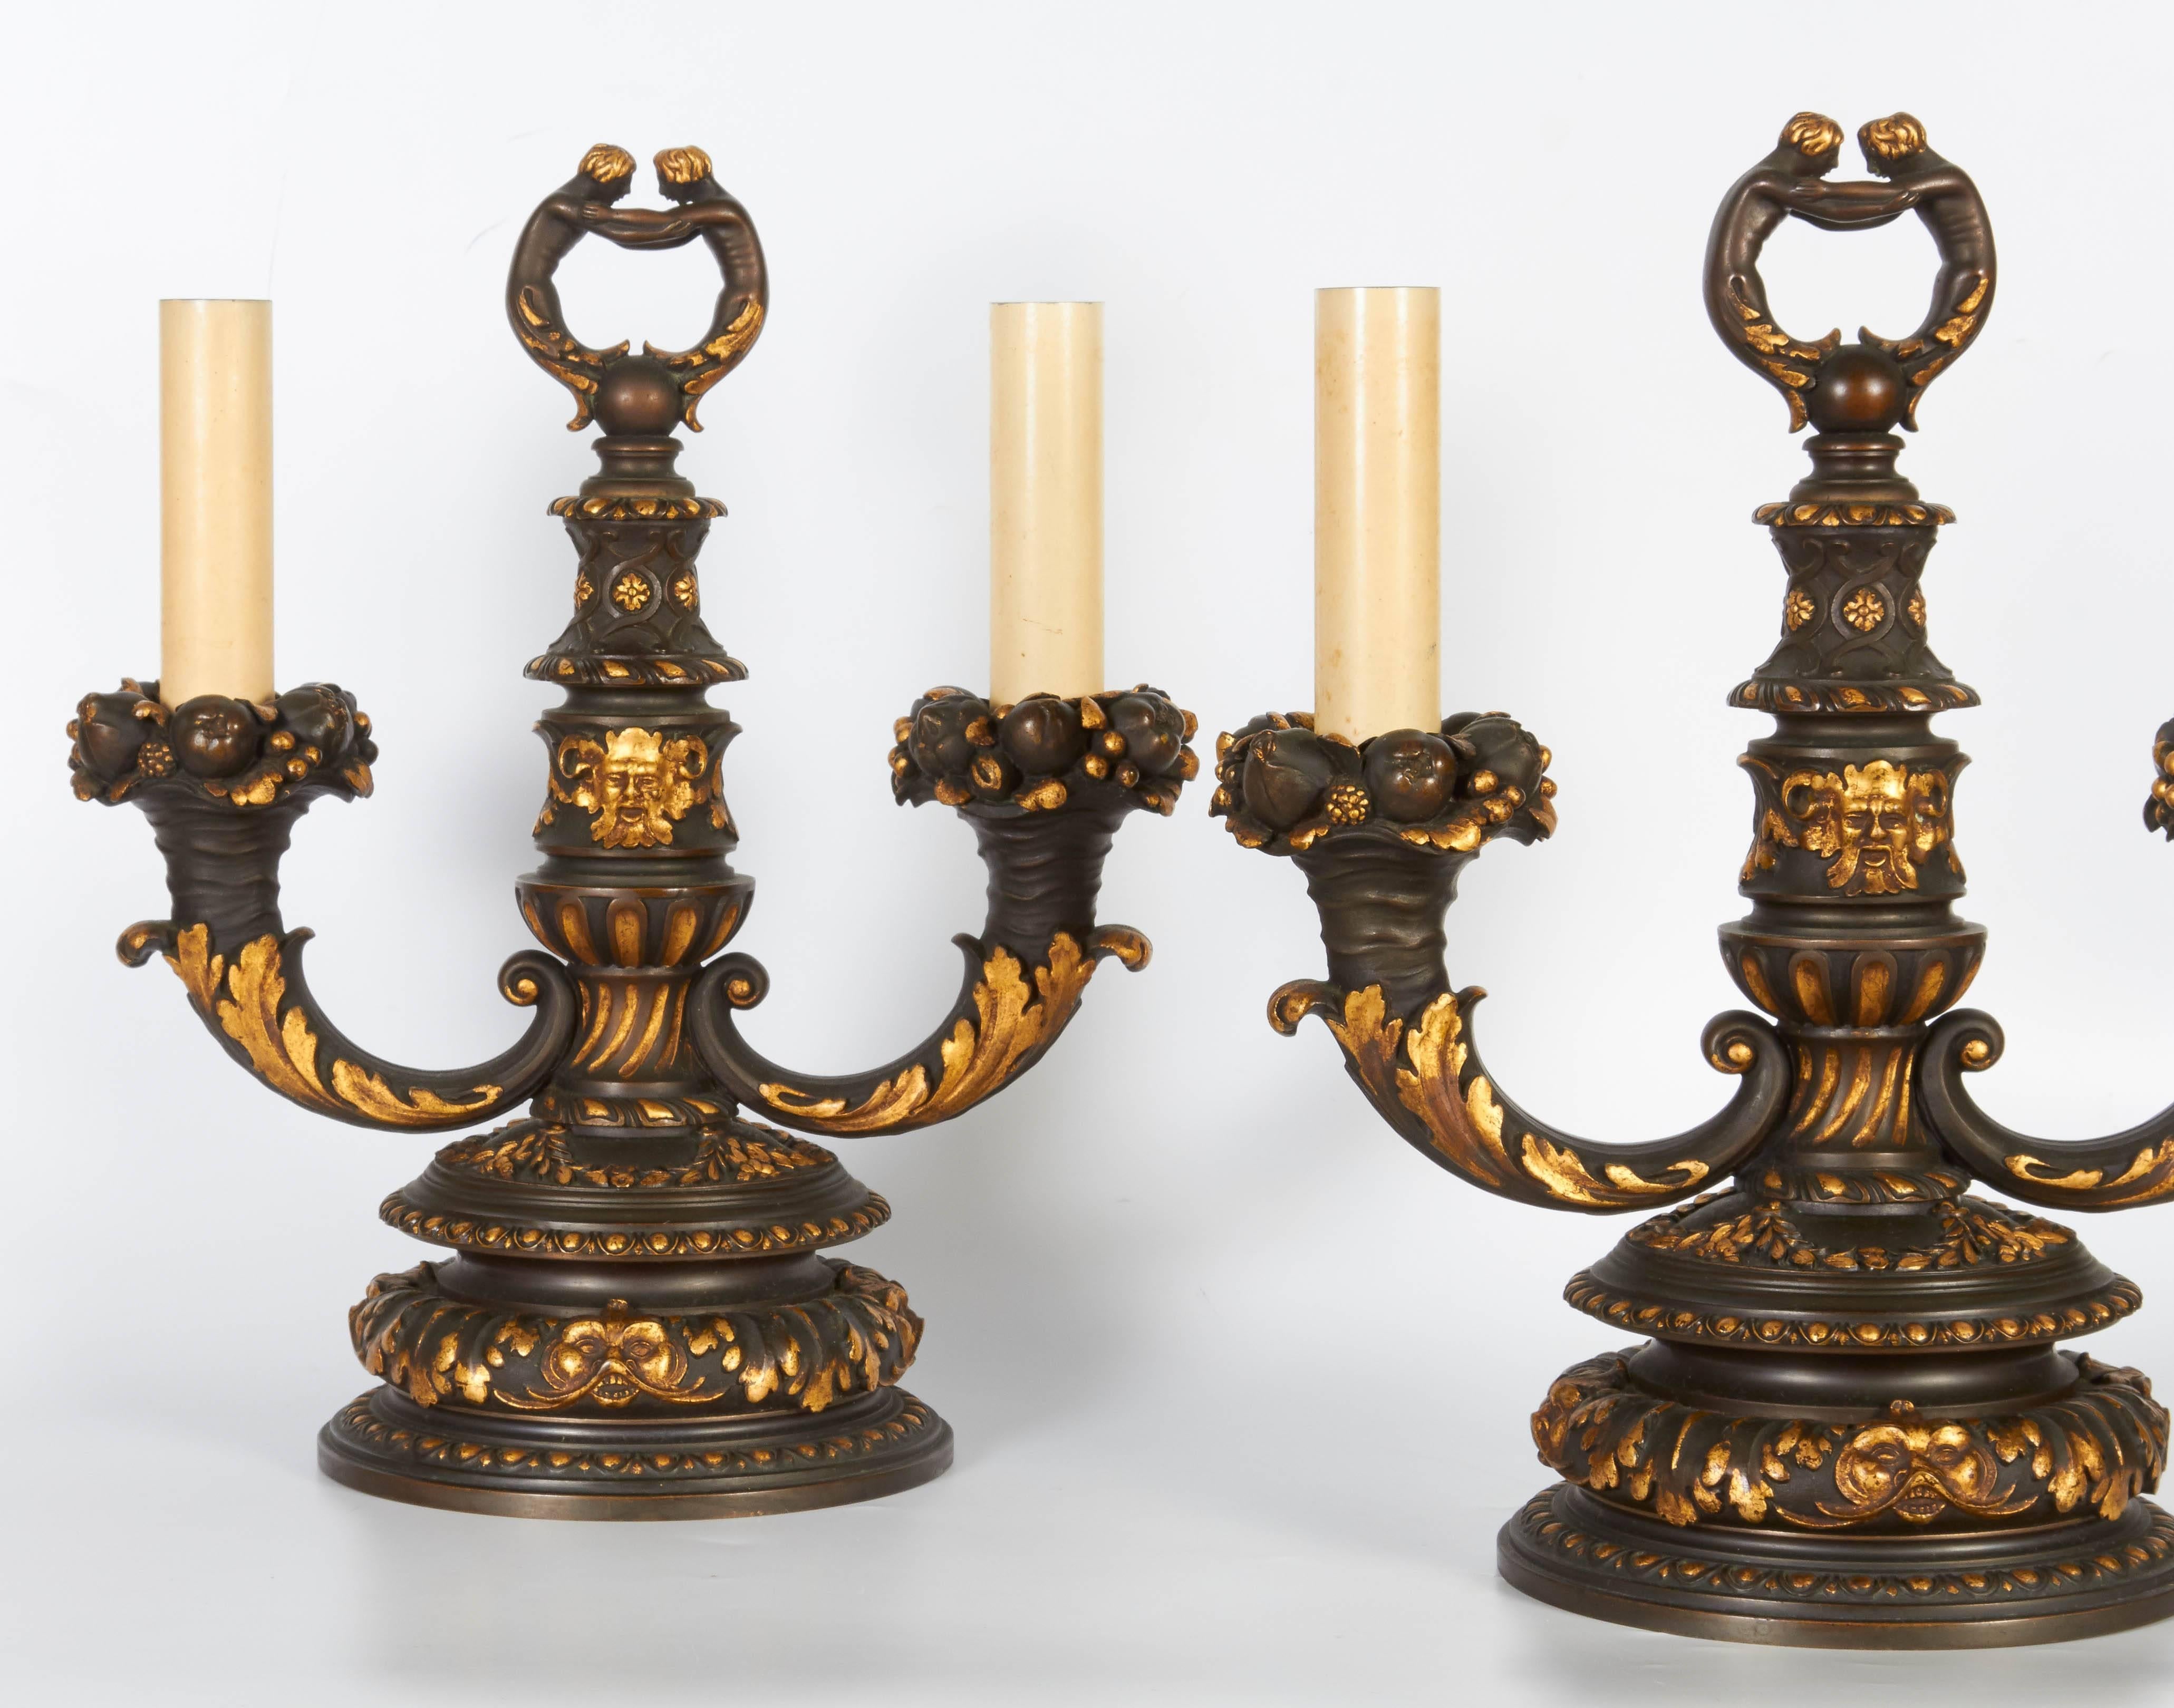 A fine pair of American parcel-gilt and patinated bronze, twin light candelabras/ table lamps
attributed to Edward F. Caldwell & Co, New York, first quarter of the 20th century.
Each with loads of overwhelming garlands of flowers and fruits